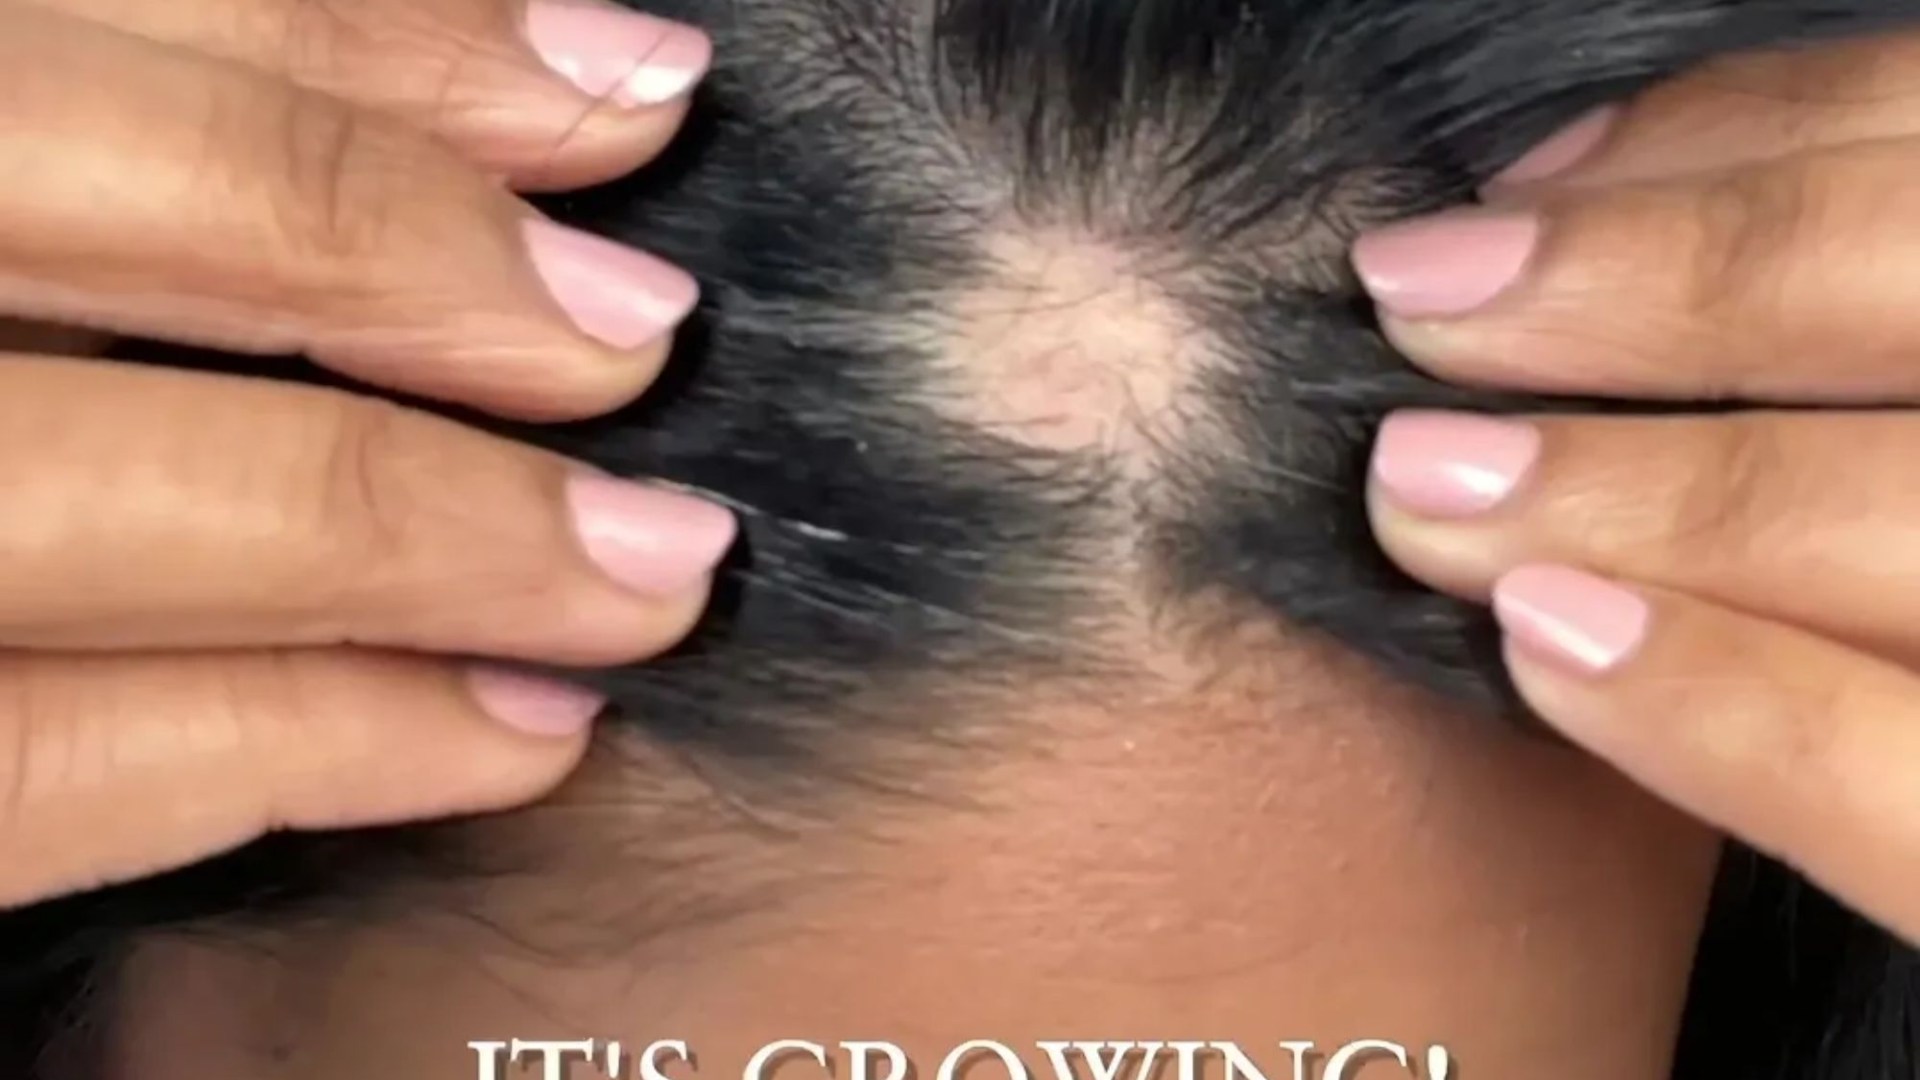 Isuffered from bald patches so tried a 3p hack to get my hair to grow back – it really stinks but is so effective [Video]